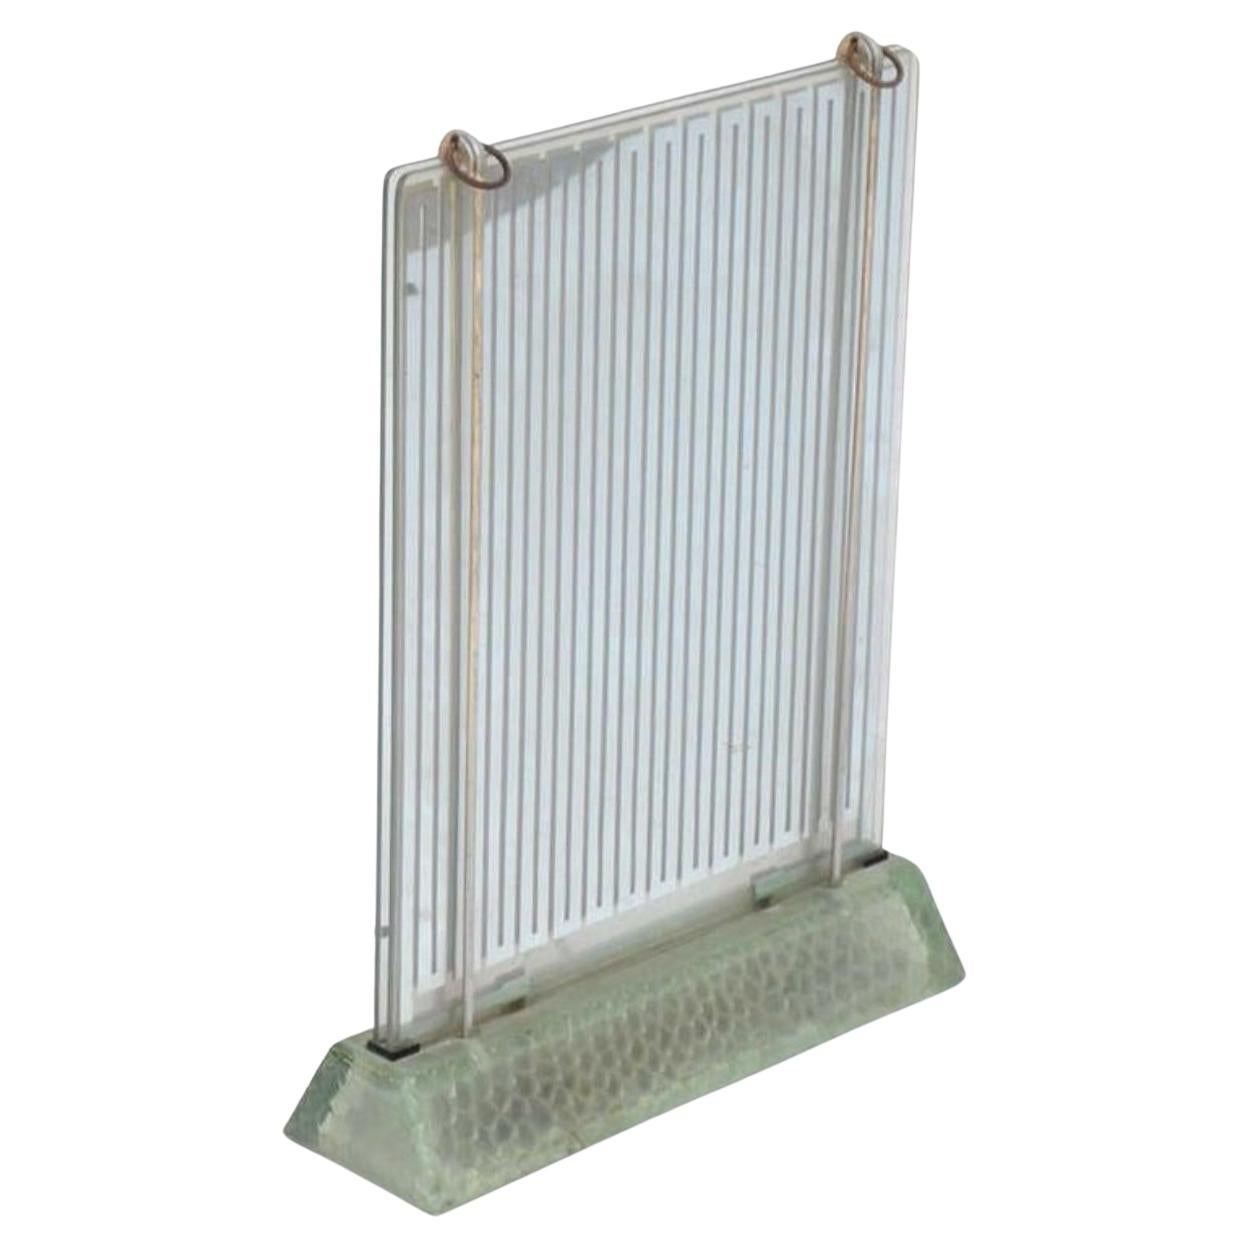 Rare Museum-Quality Glass Radiator by René Coulon for Saint-Gobain For Sale